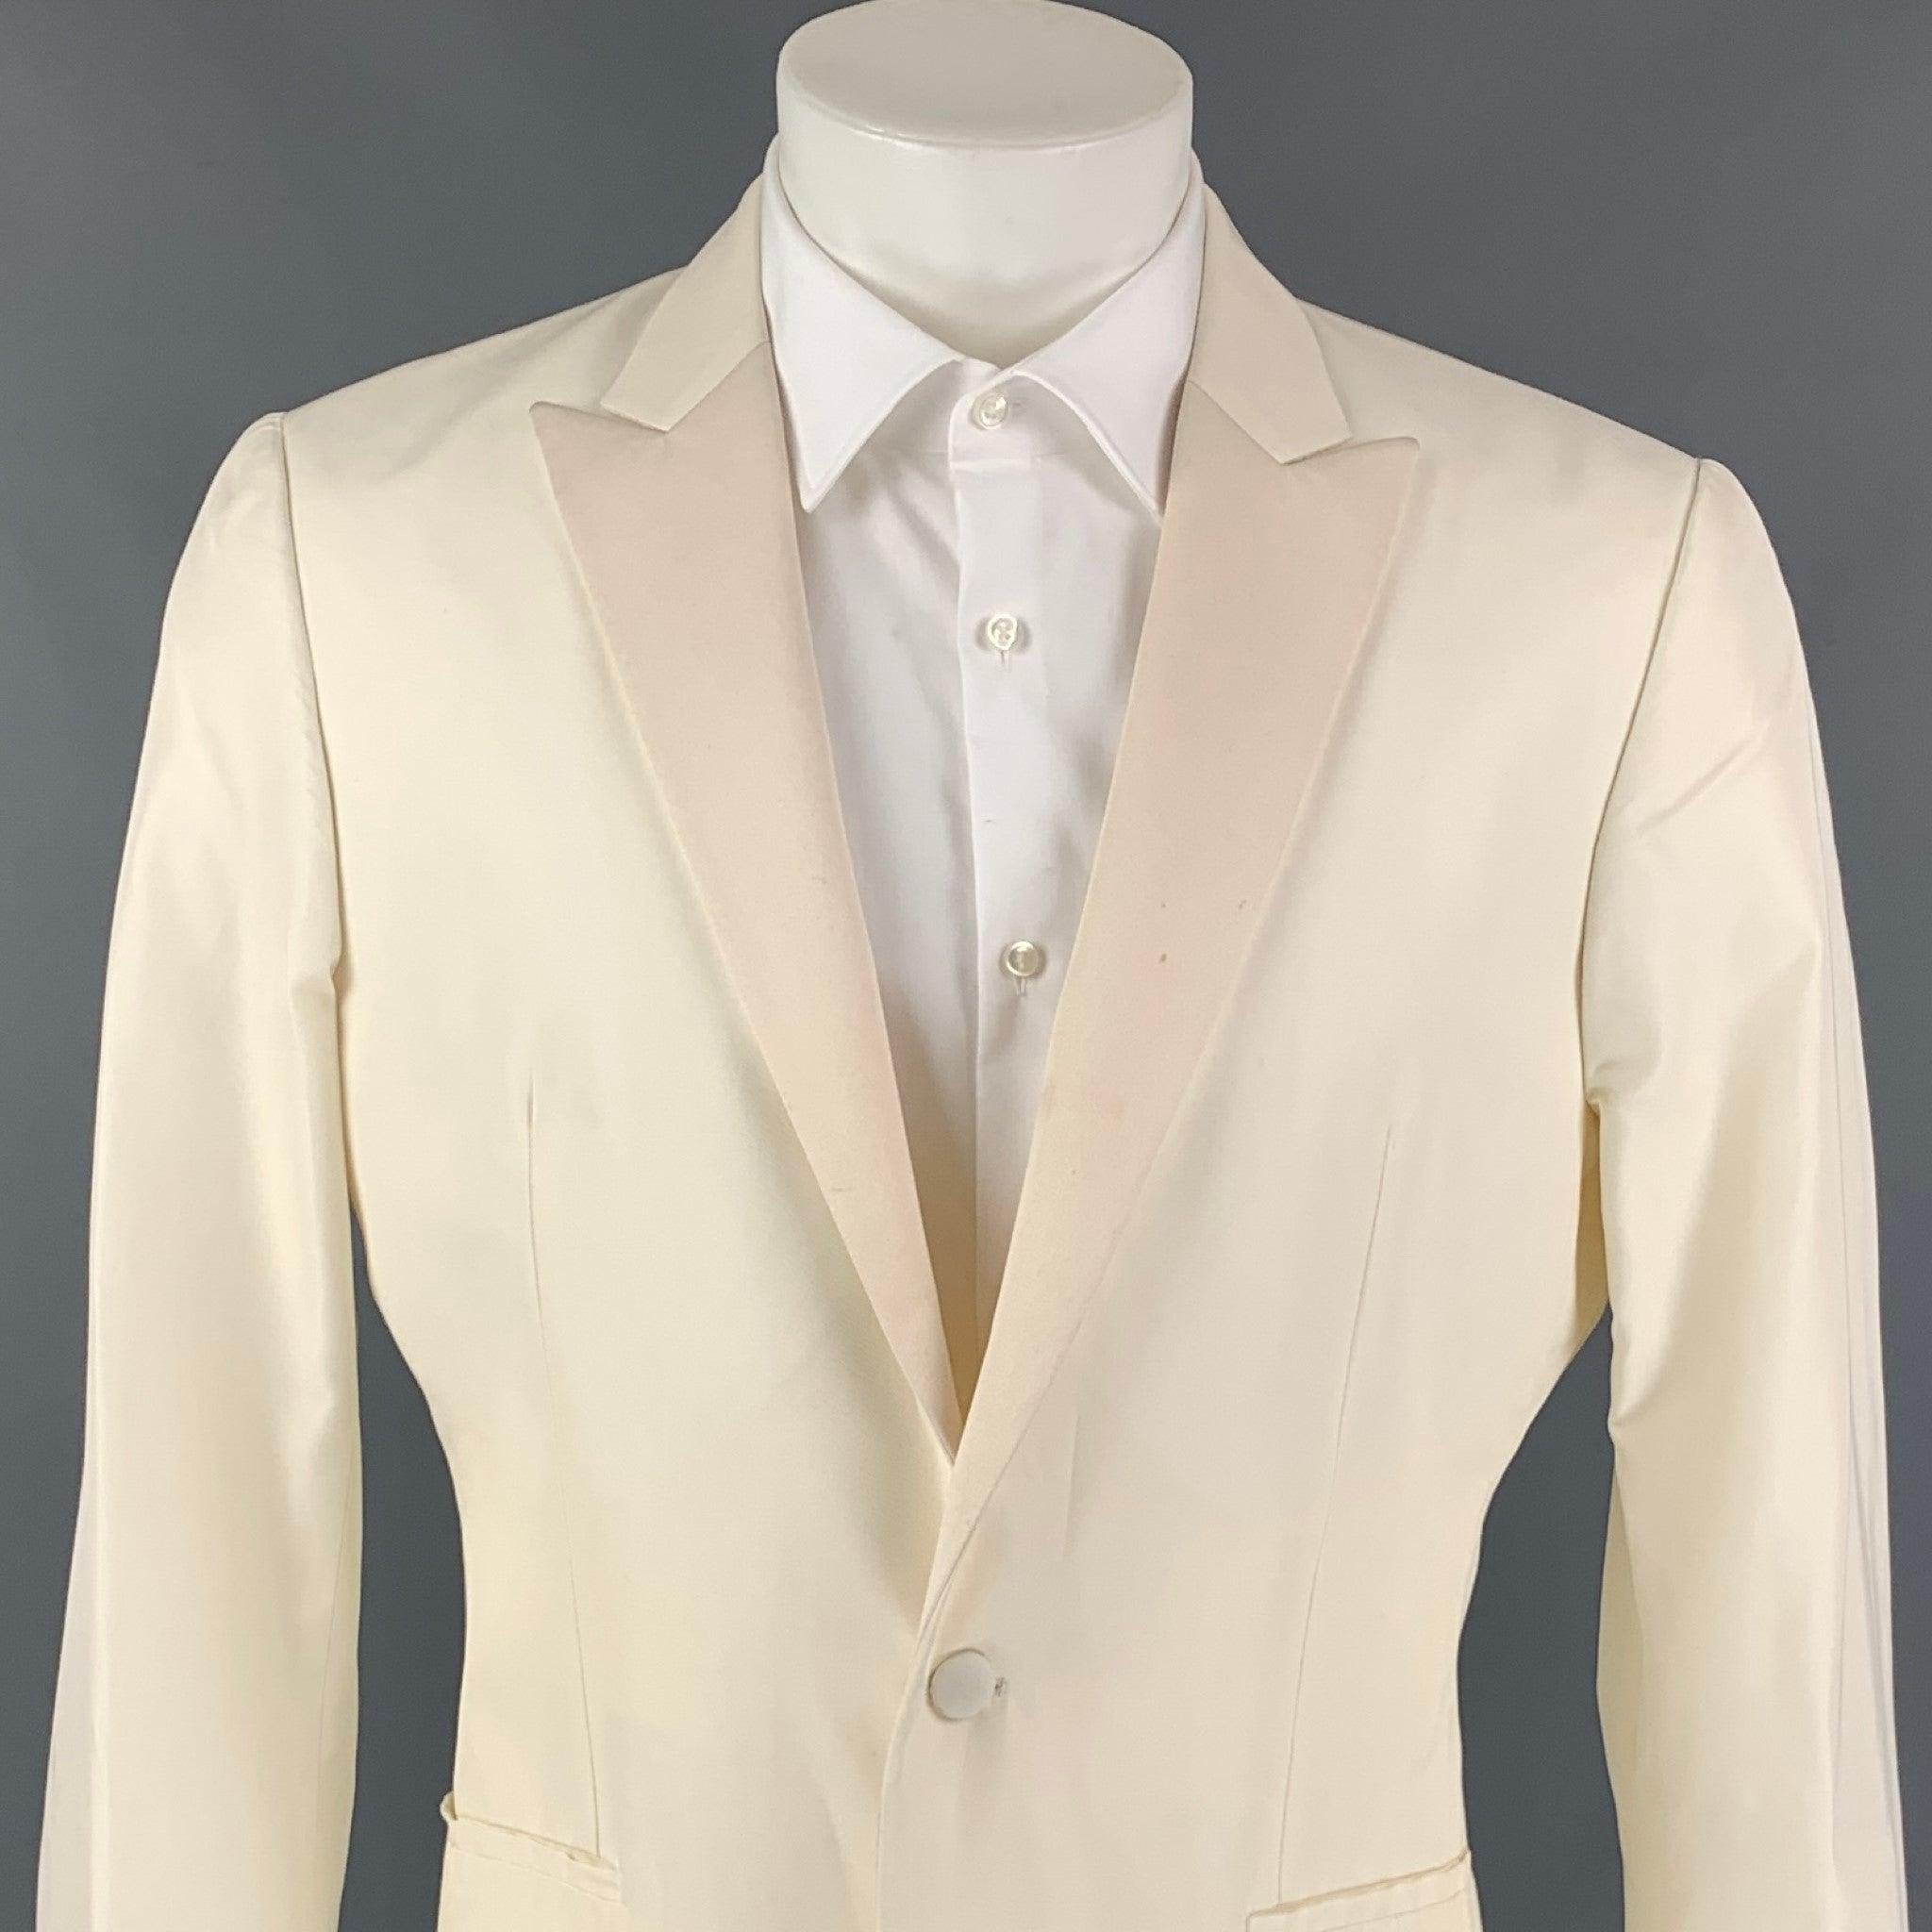 CALVIN KLEIN sport coat comes in a off white silk with a full liner featuring a peak lapel, double back vent, slit pockets, and a single button closure. Made in Italy.
Very Good
Pre-Owned Condition. Light marks at lapel.  

Marked:   50/40